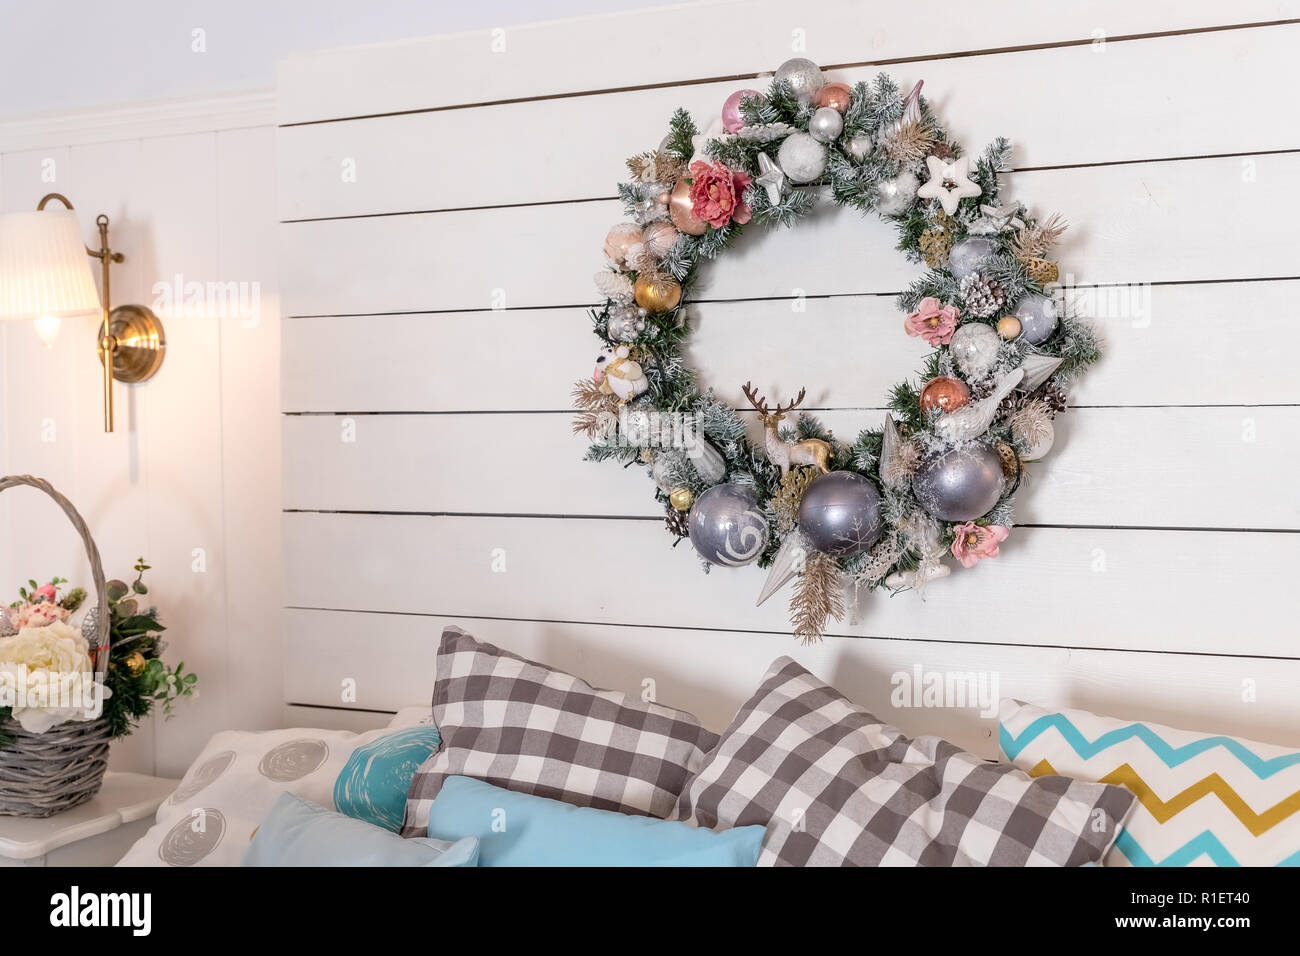 Wreath Of Christmas Balls Above The Bed New Year Decoration